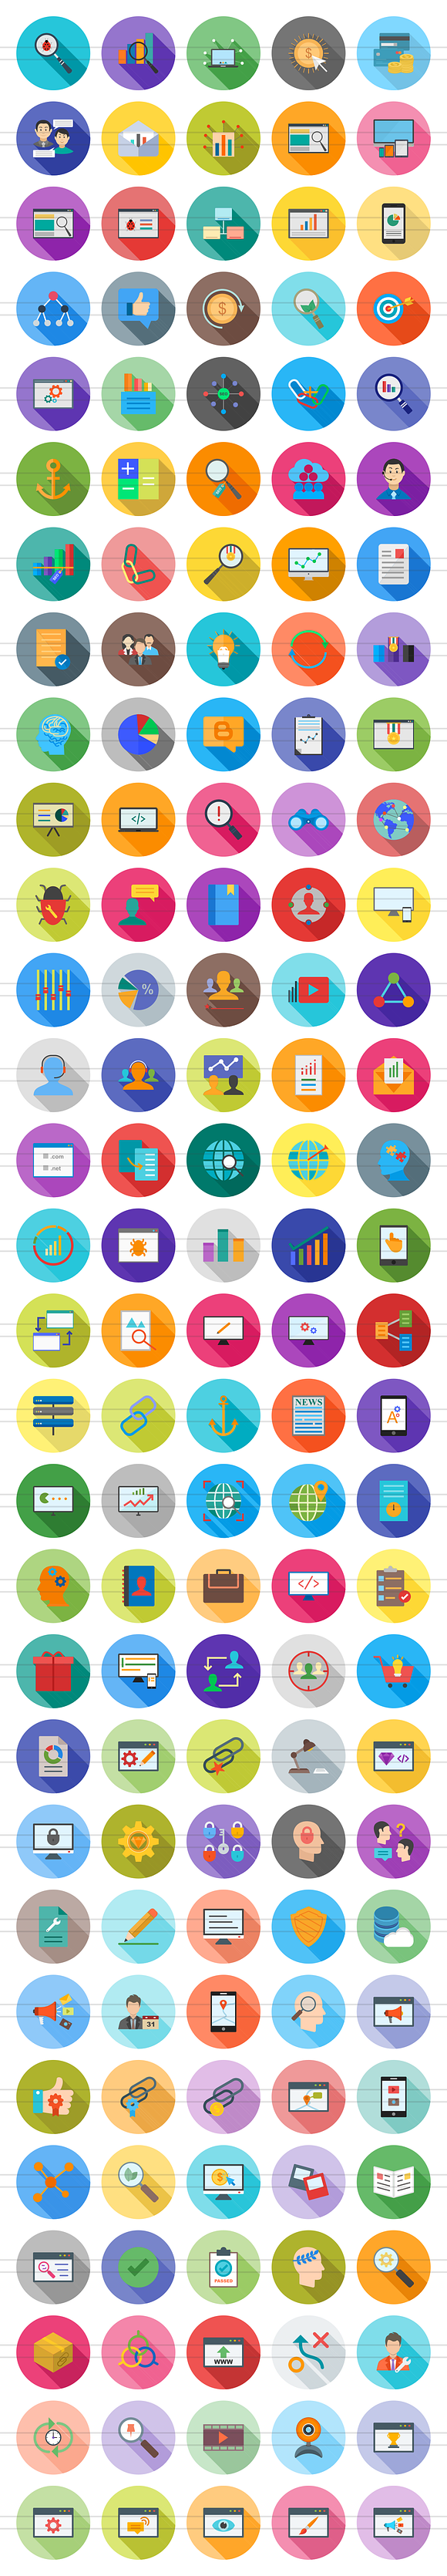 150 IT Services Flat Icons in Graphics - product preview 1